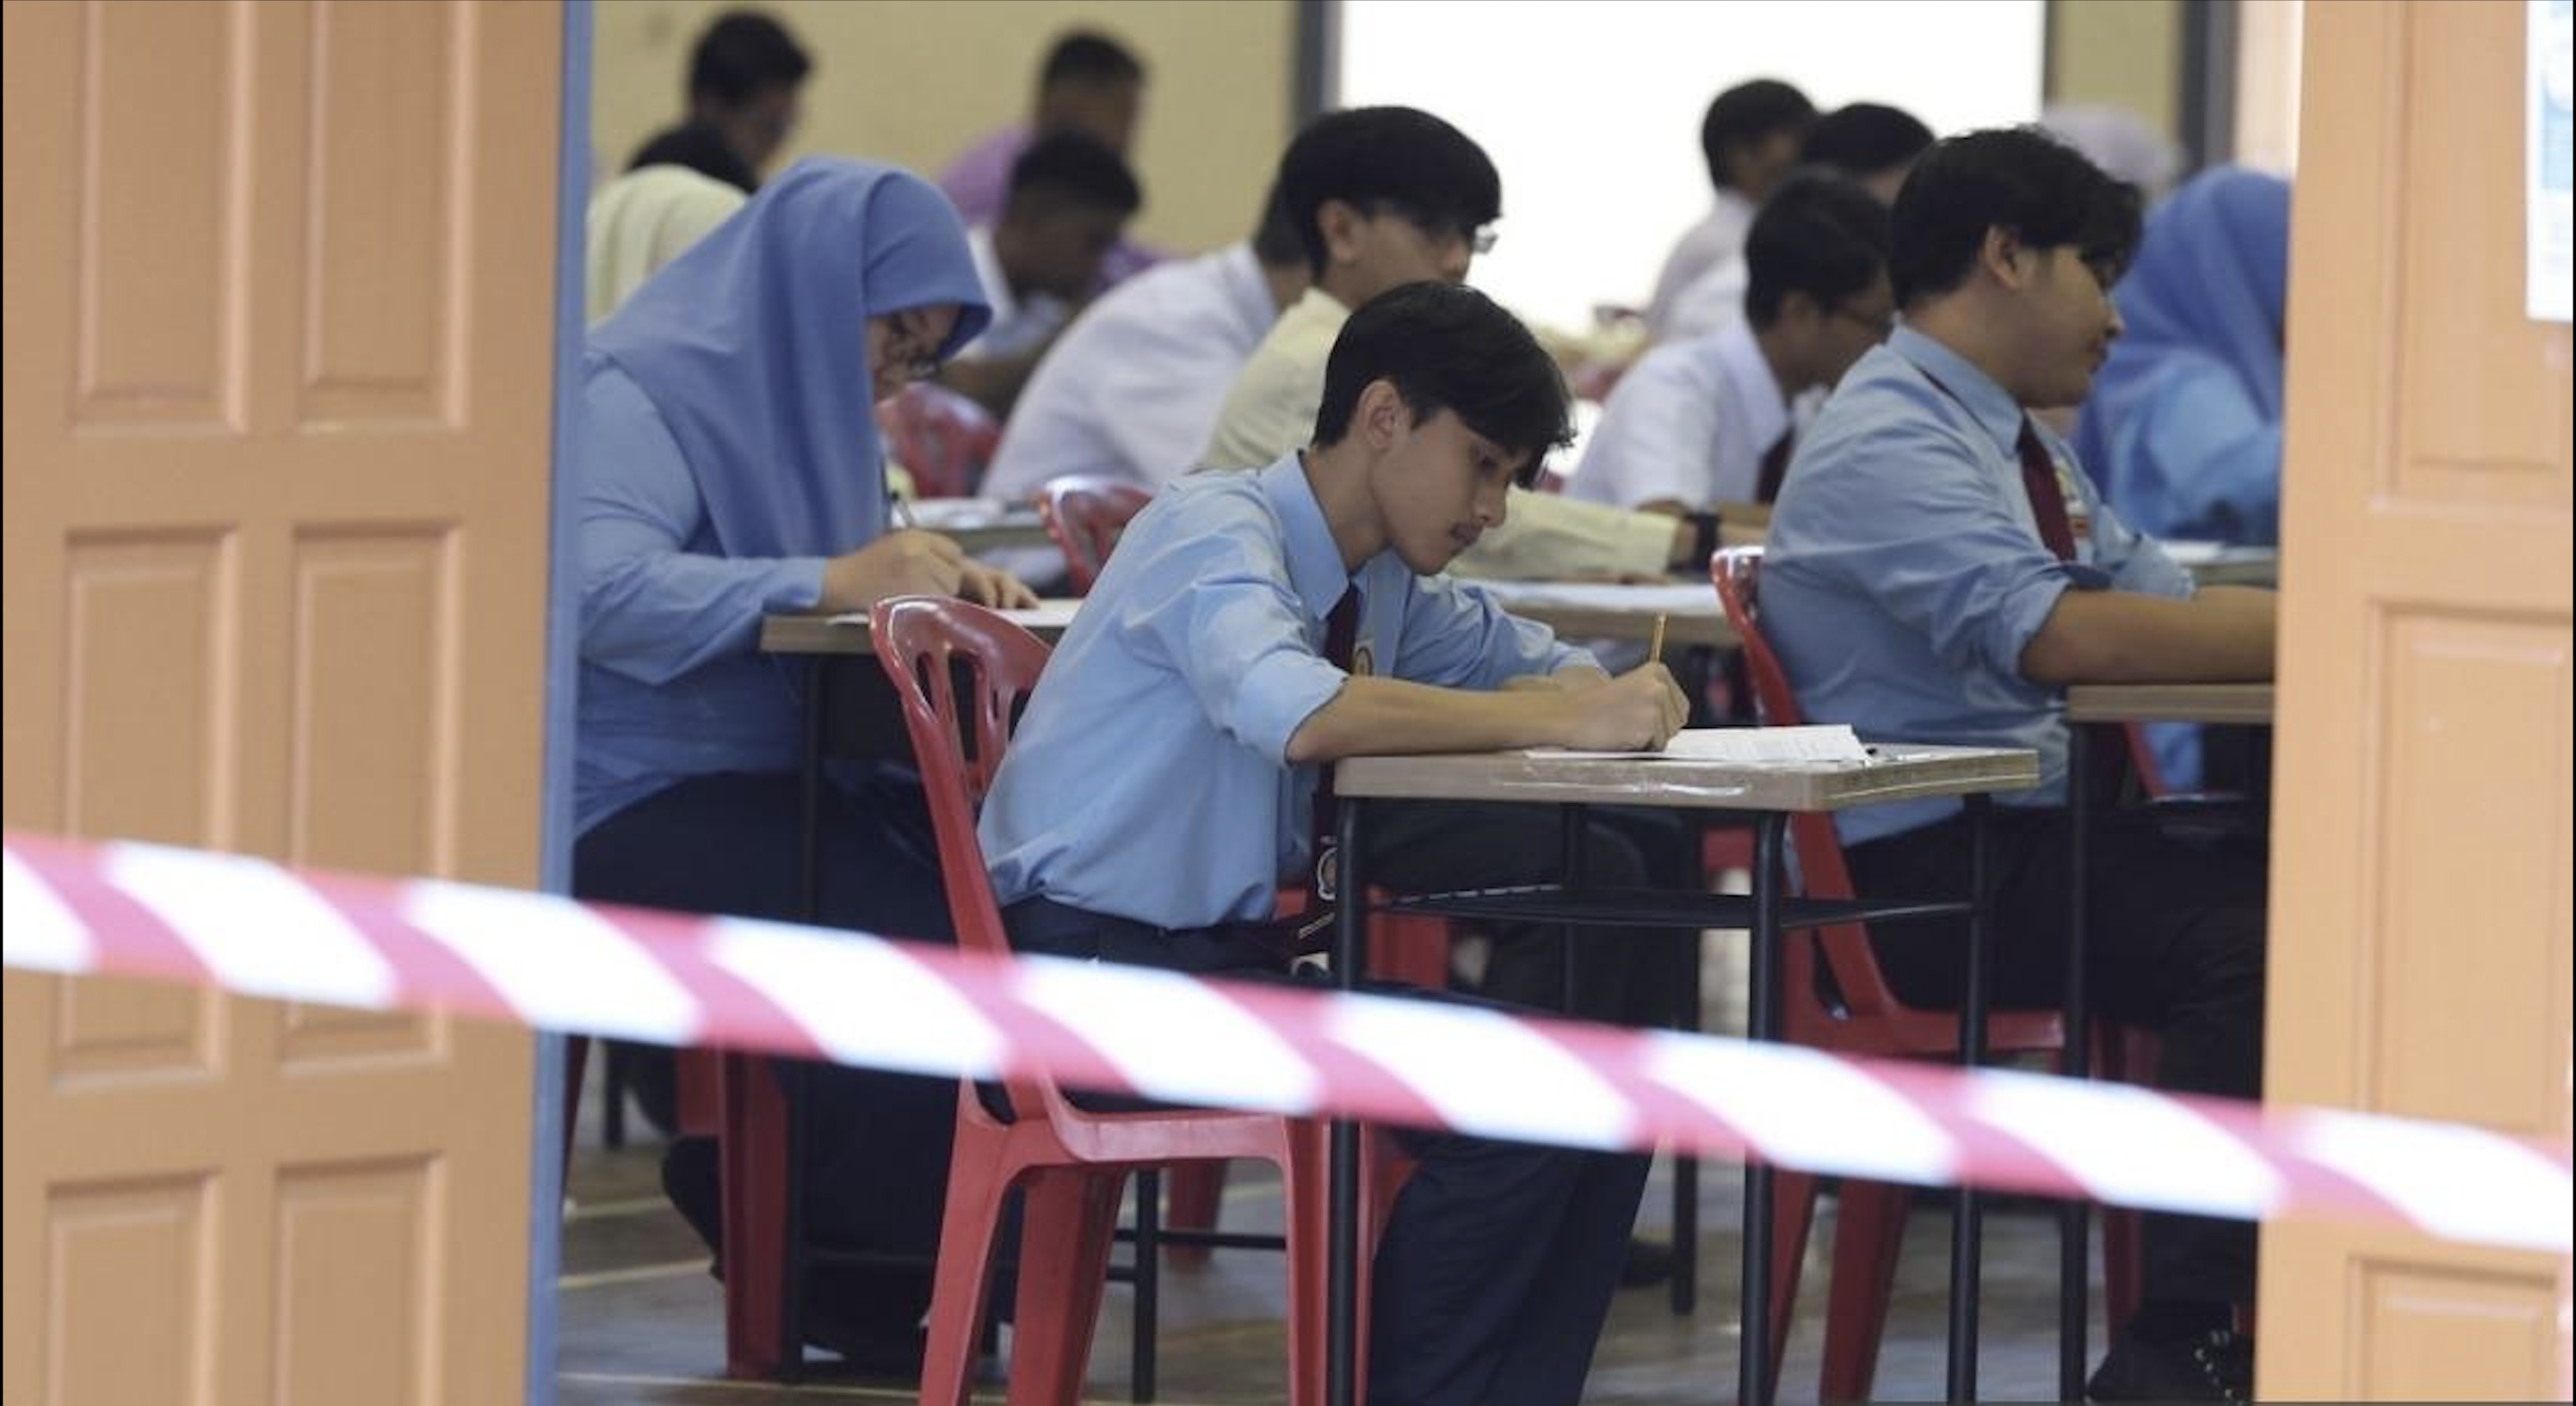 SPM dropout down 1.2% from previous year with intervention: deputy edu minister